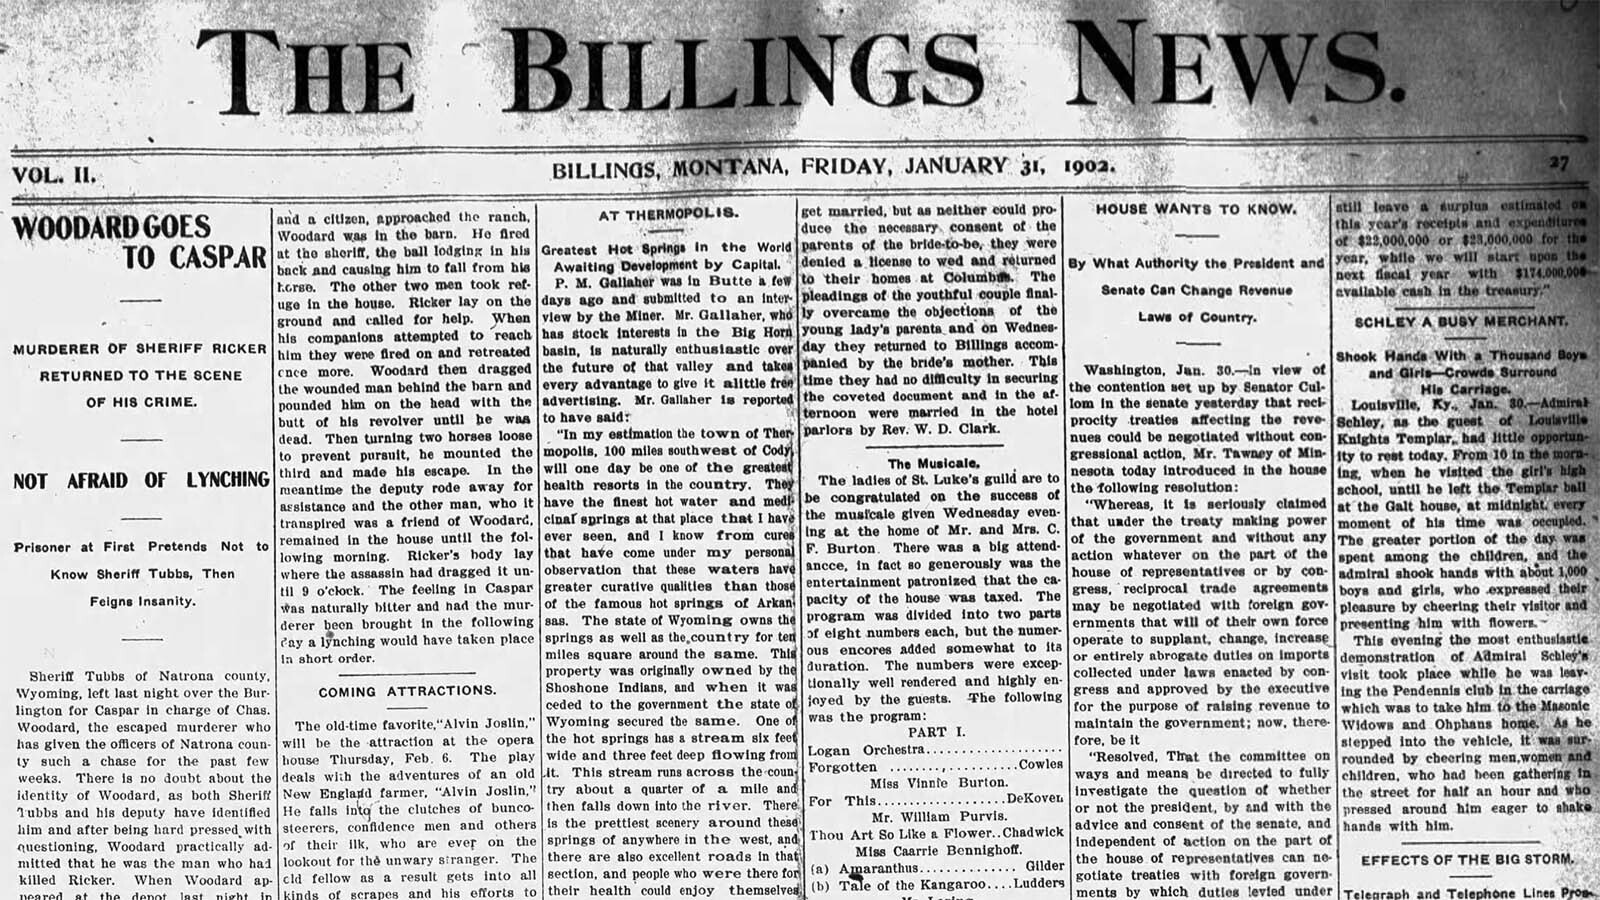 The Billings News in Billings, Montana, reports on the captured Charles Woodard being sent back to Casper.